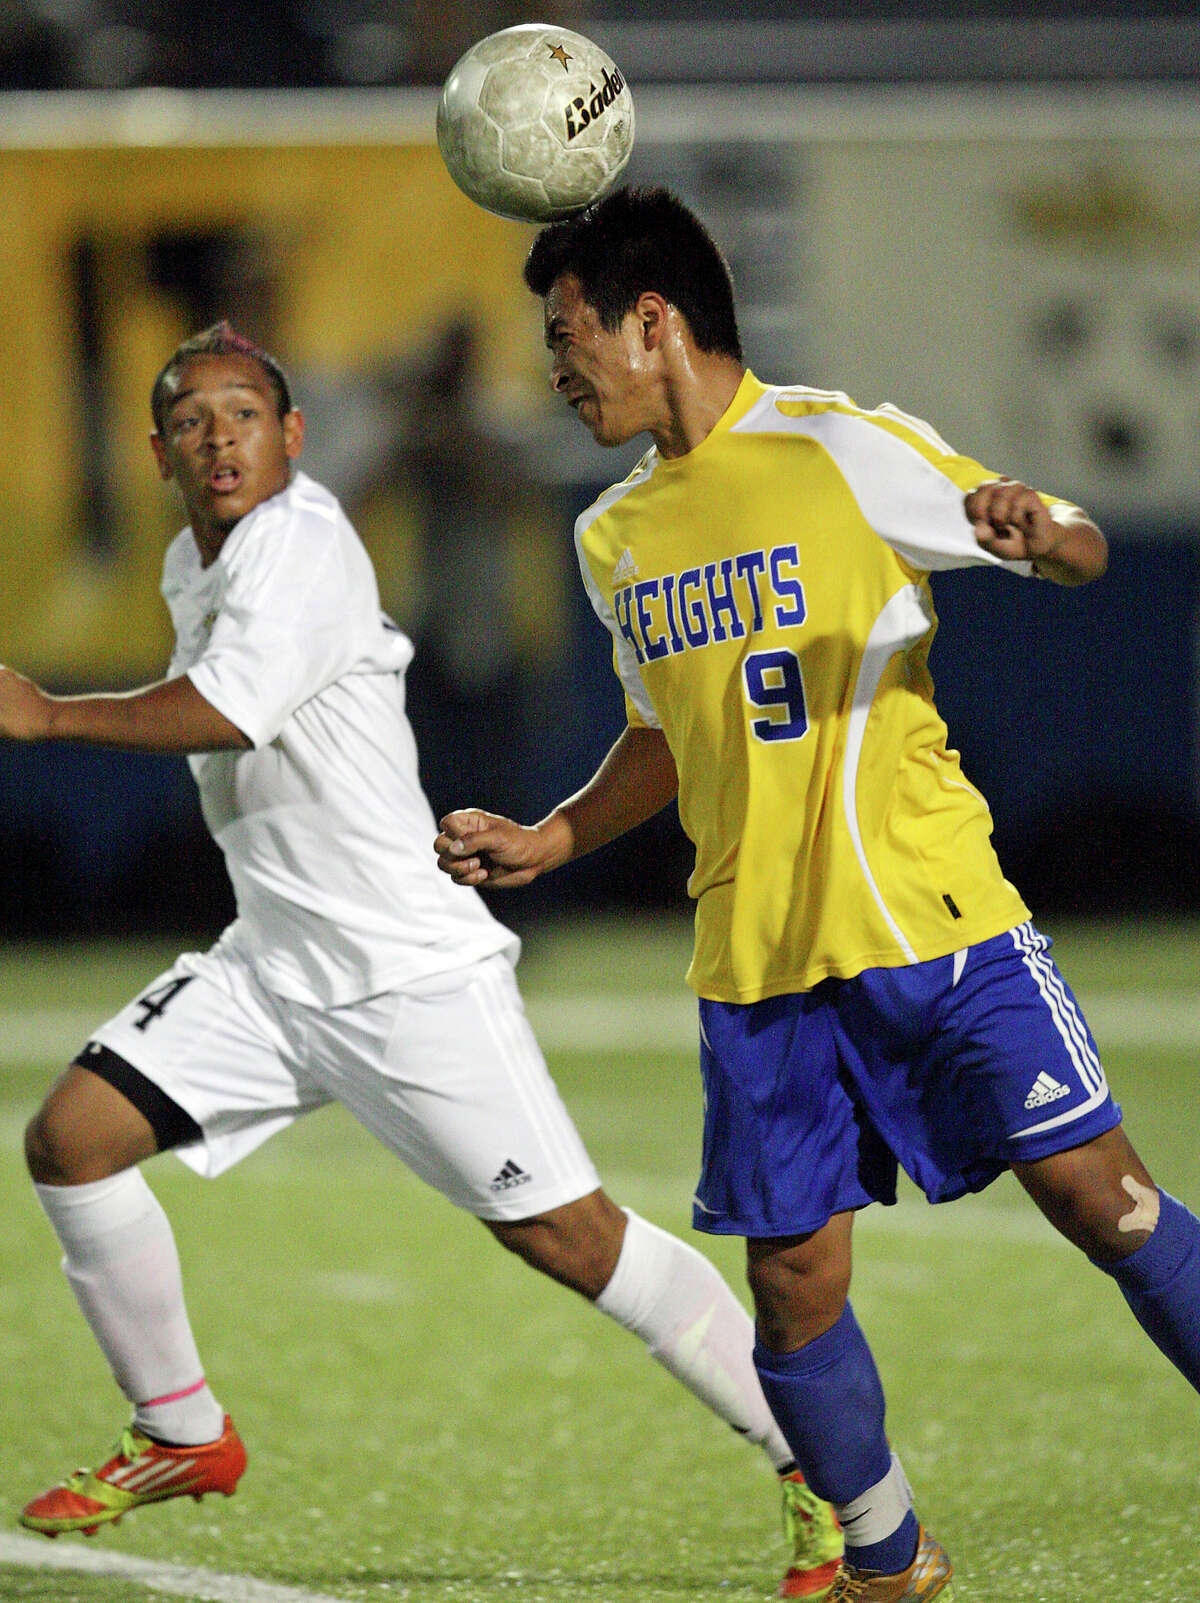 Alamo Heights' Christian Garcia heads a ball as Wichita Falls Rider's Juan Orozco looks on during first half action of the Class 4A state final game Saturday, April 21, 2012 at Birkelbach Field in Georgetown.